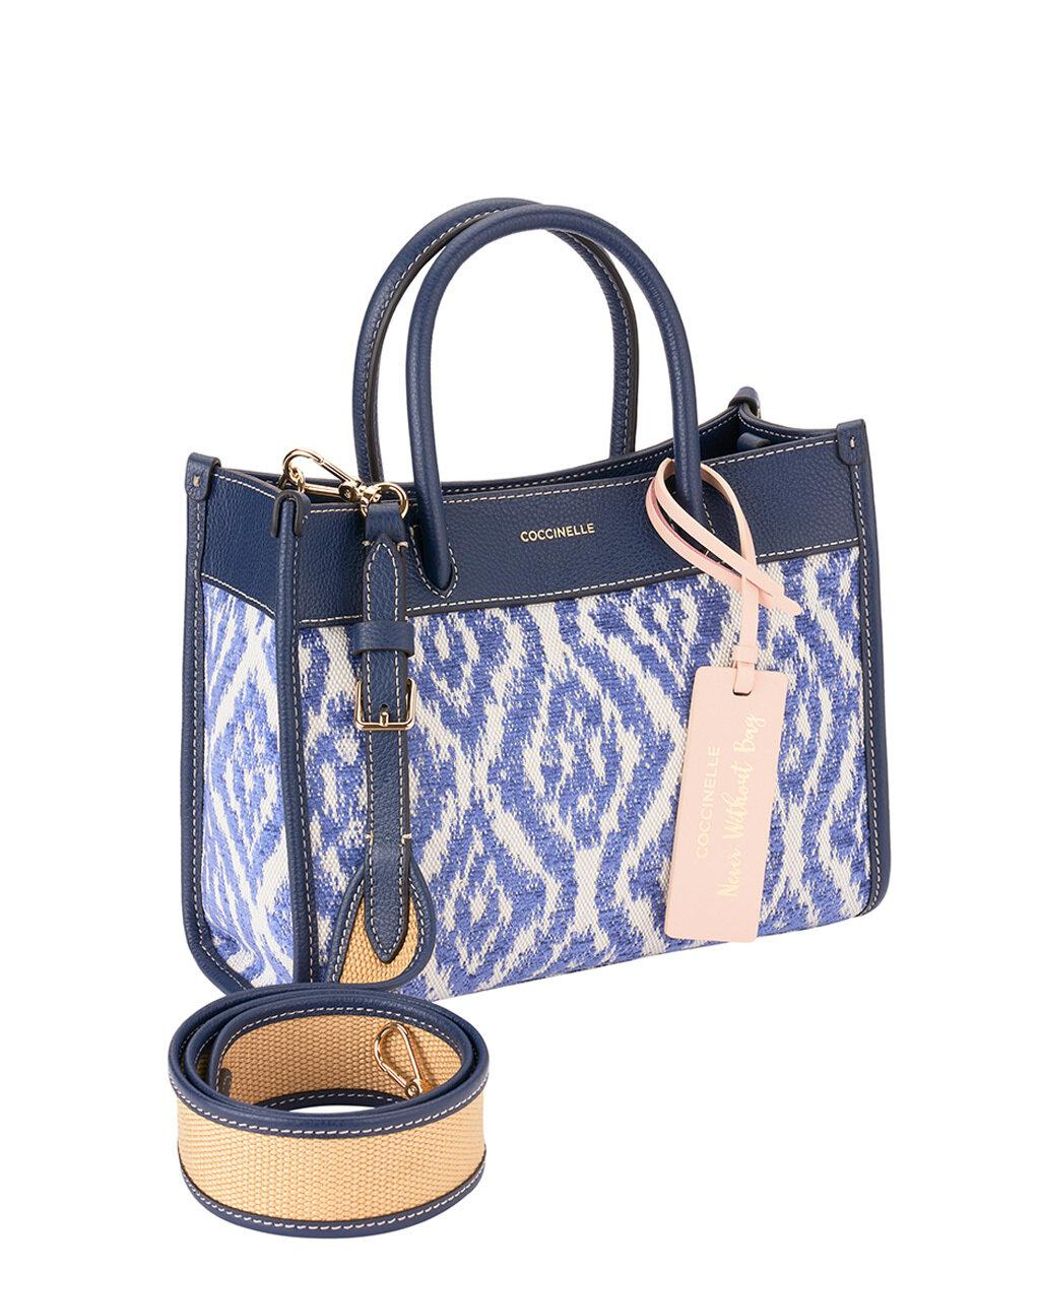 Coccinelle Cotton Nwb Jacquard Bag in Navy (Blue) | Lyst